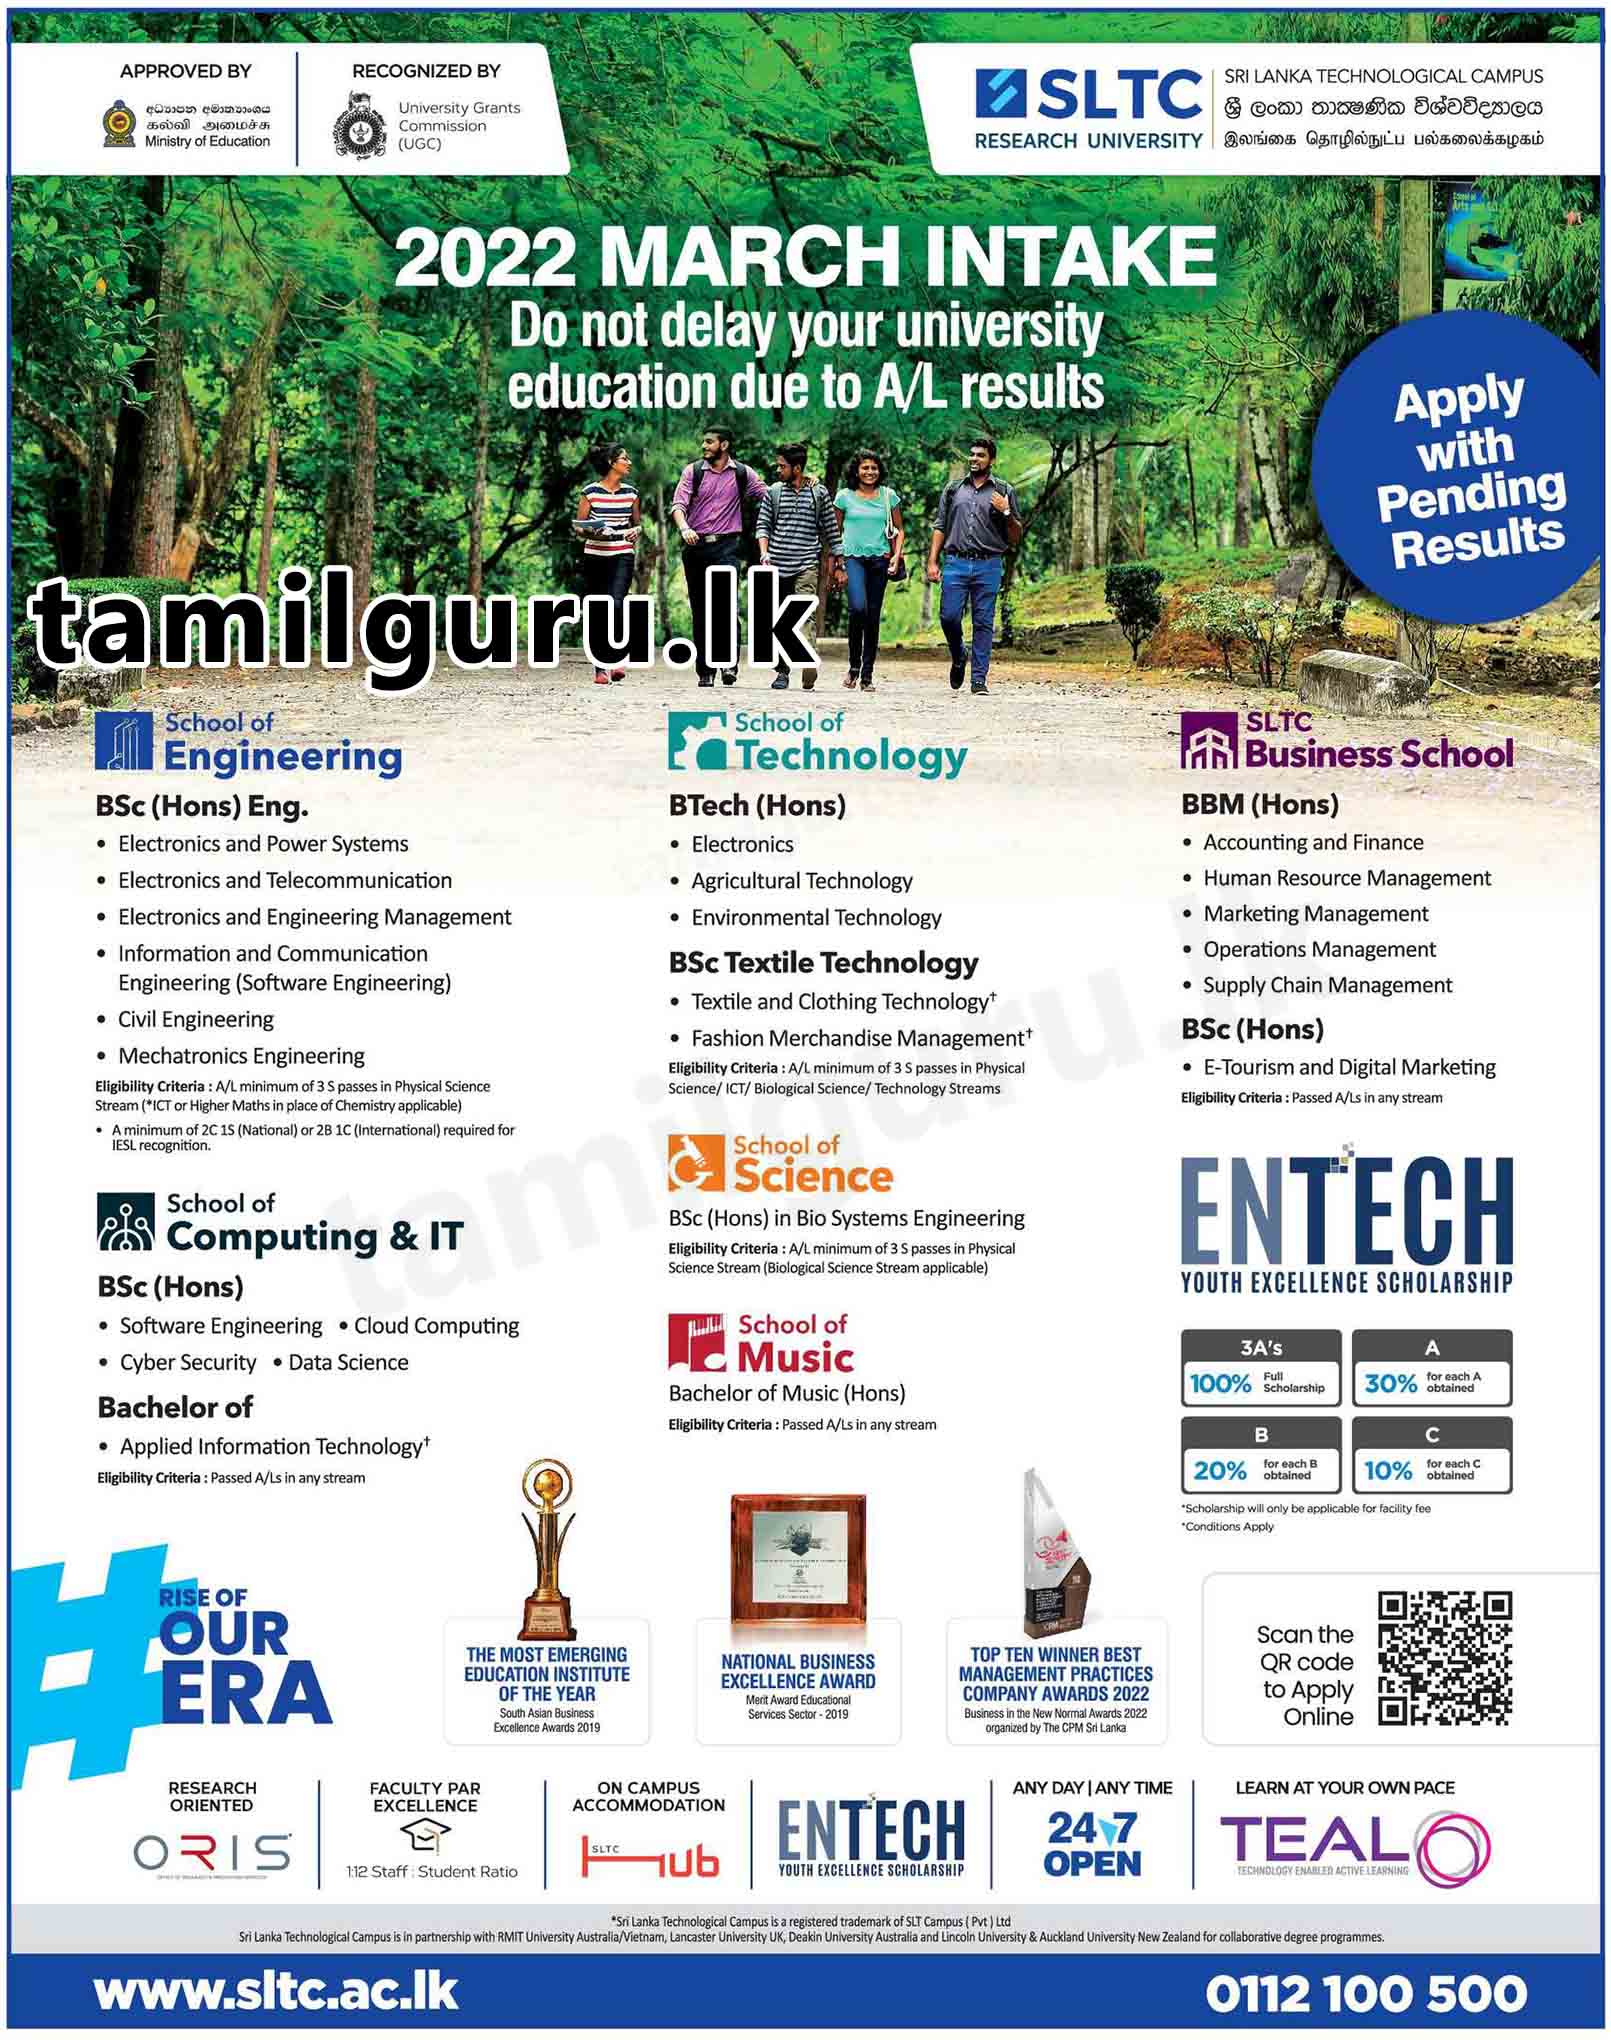 Admission for Degree Programmes (2022 March Intake) - Sri Lanka Technological Campus (SLTC) - Apply Online with Pending A/L Results